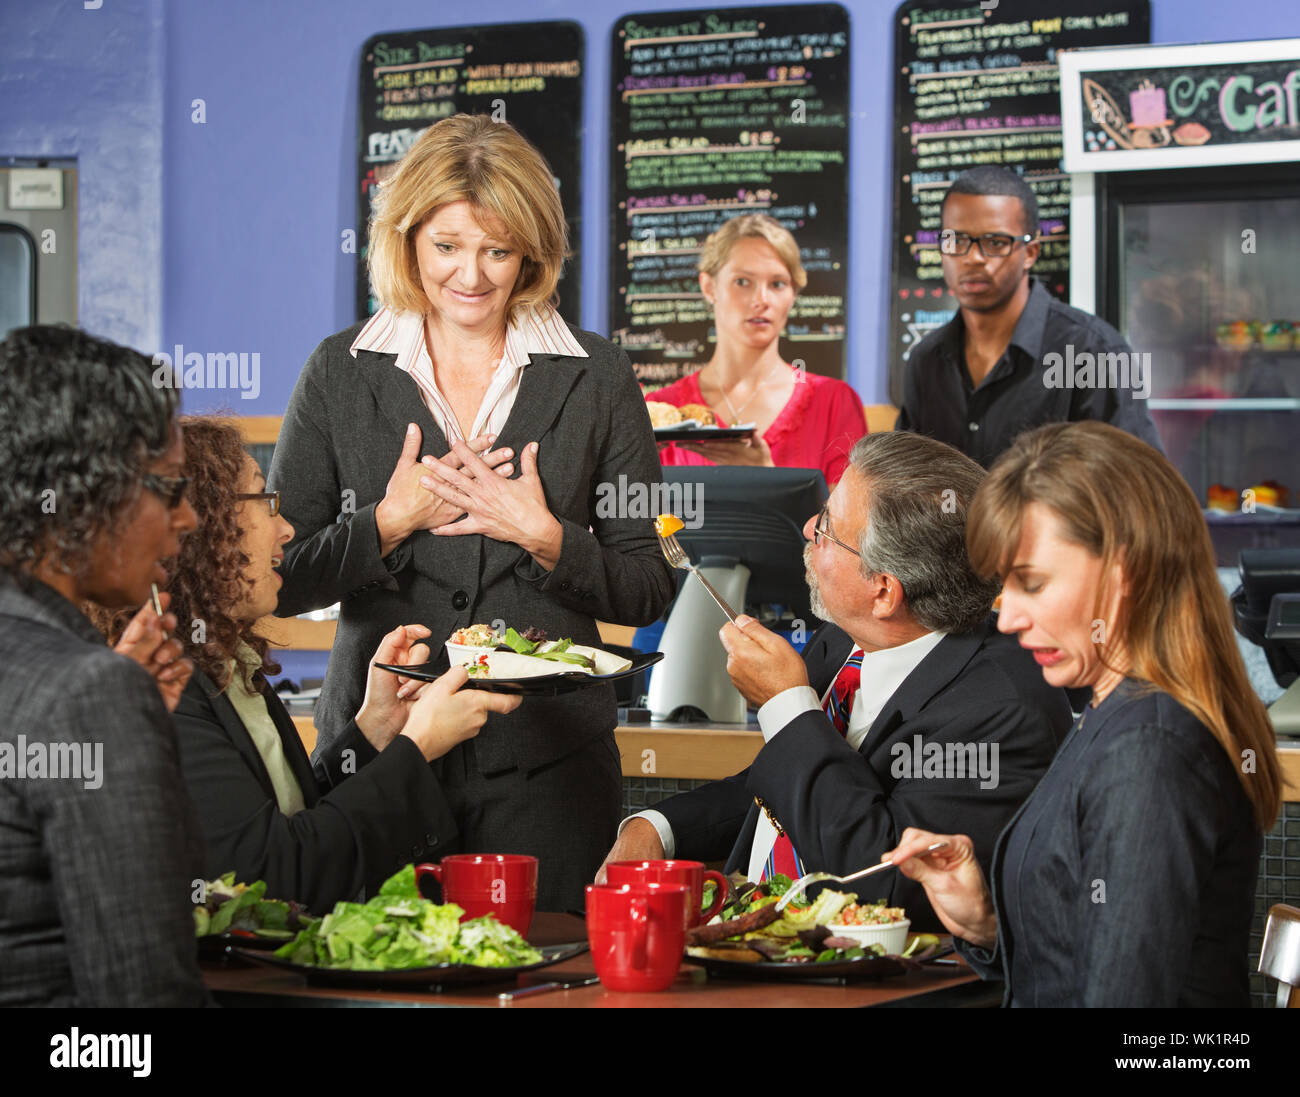 Ashamed coffee house owner with disgusted customers Stock Photo